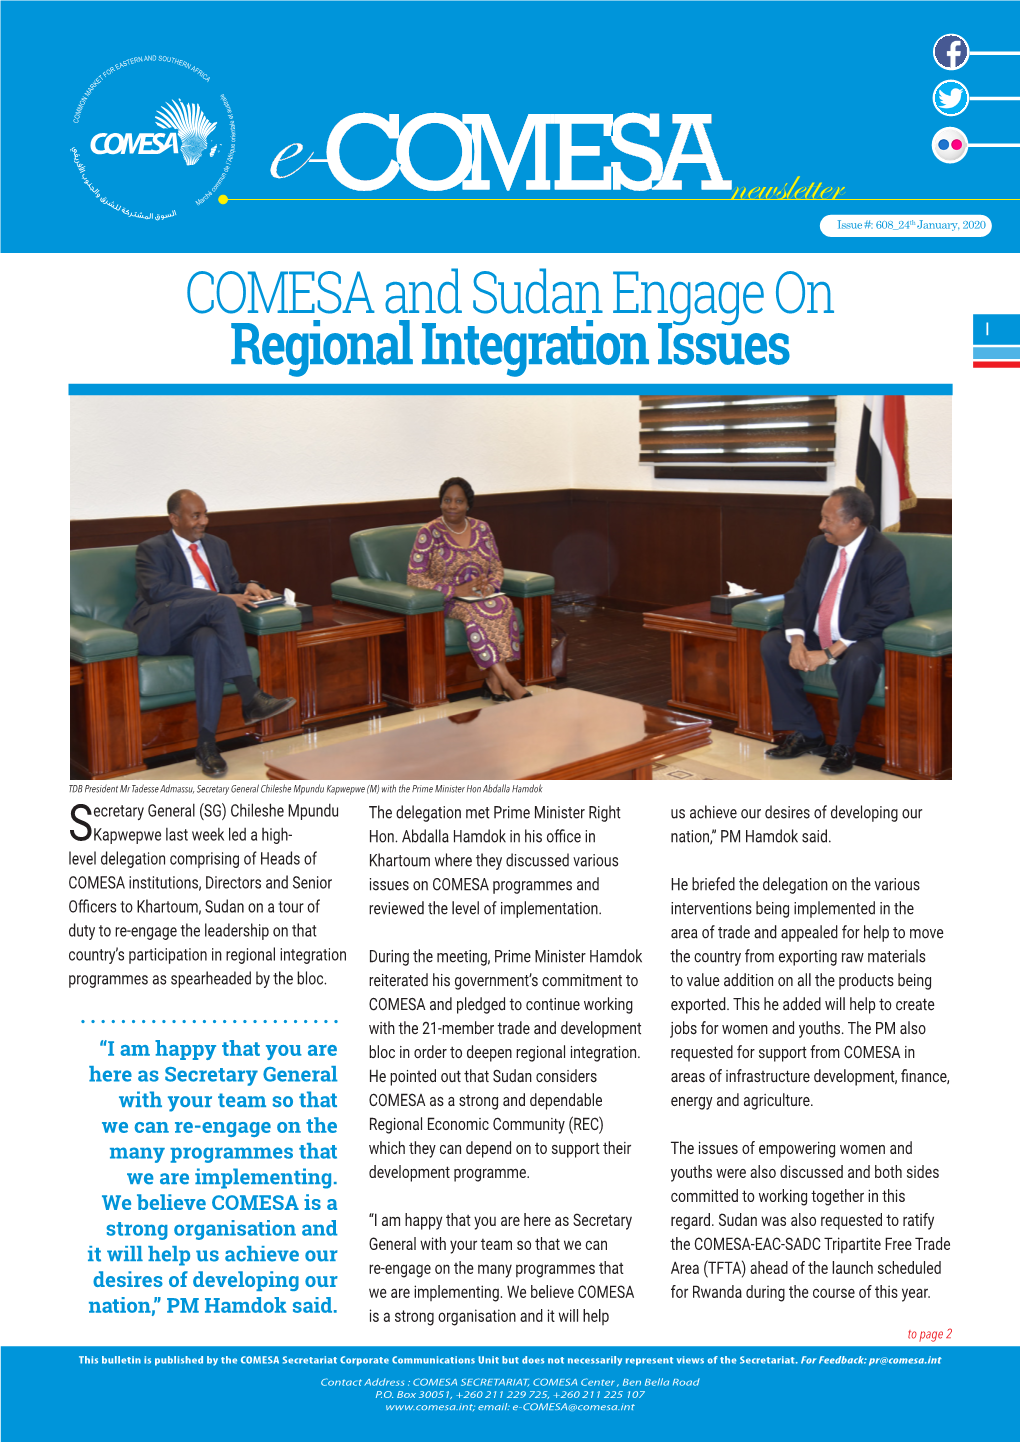 COMESA and Sudan Engage on Regional Integration Issues 1